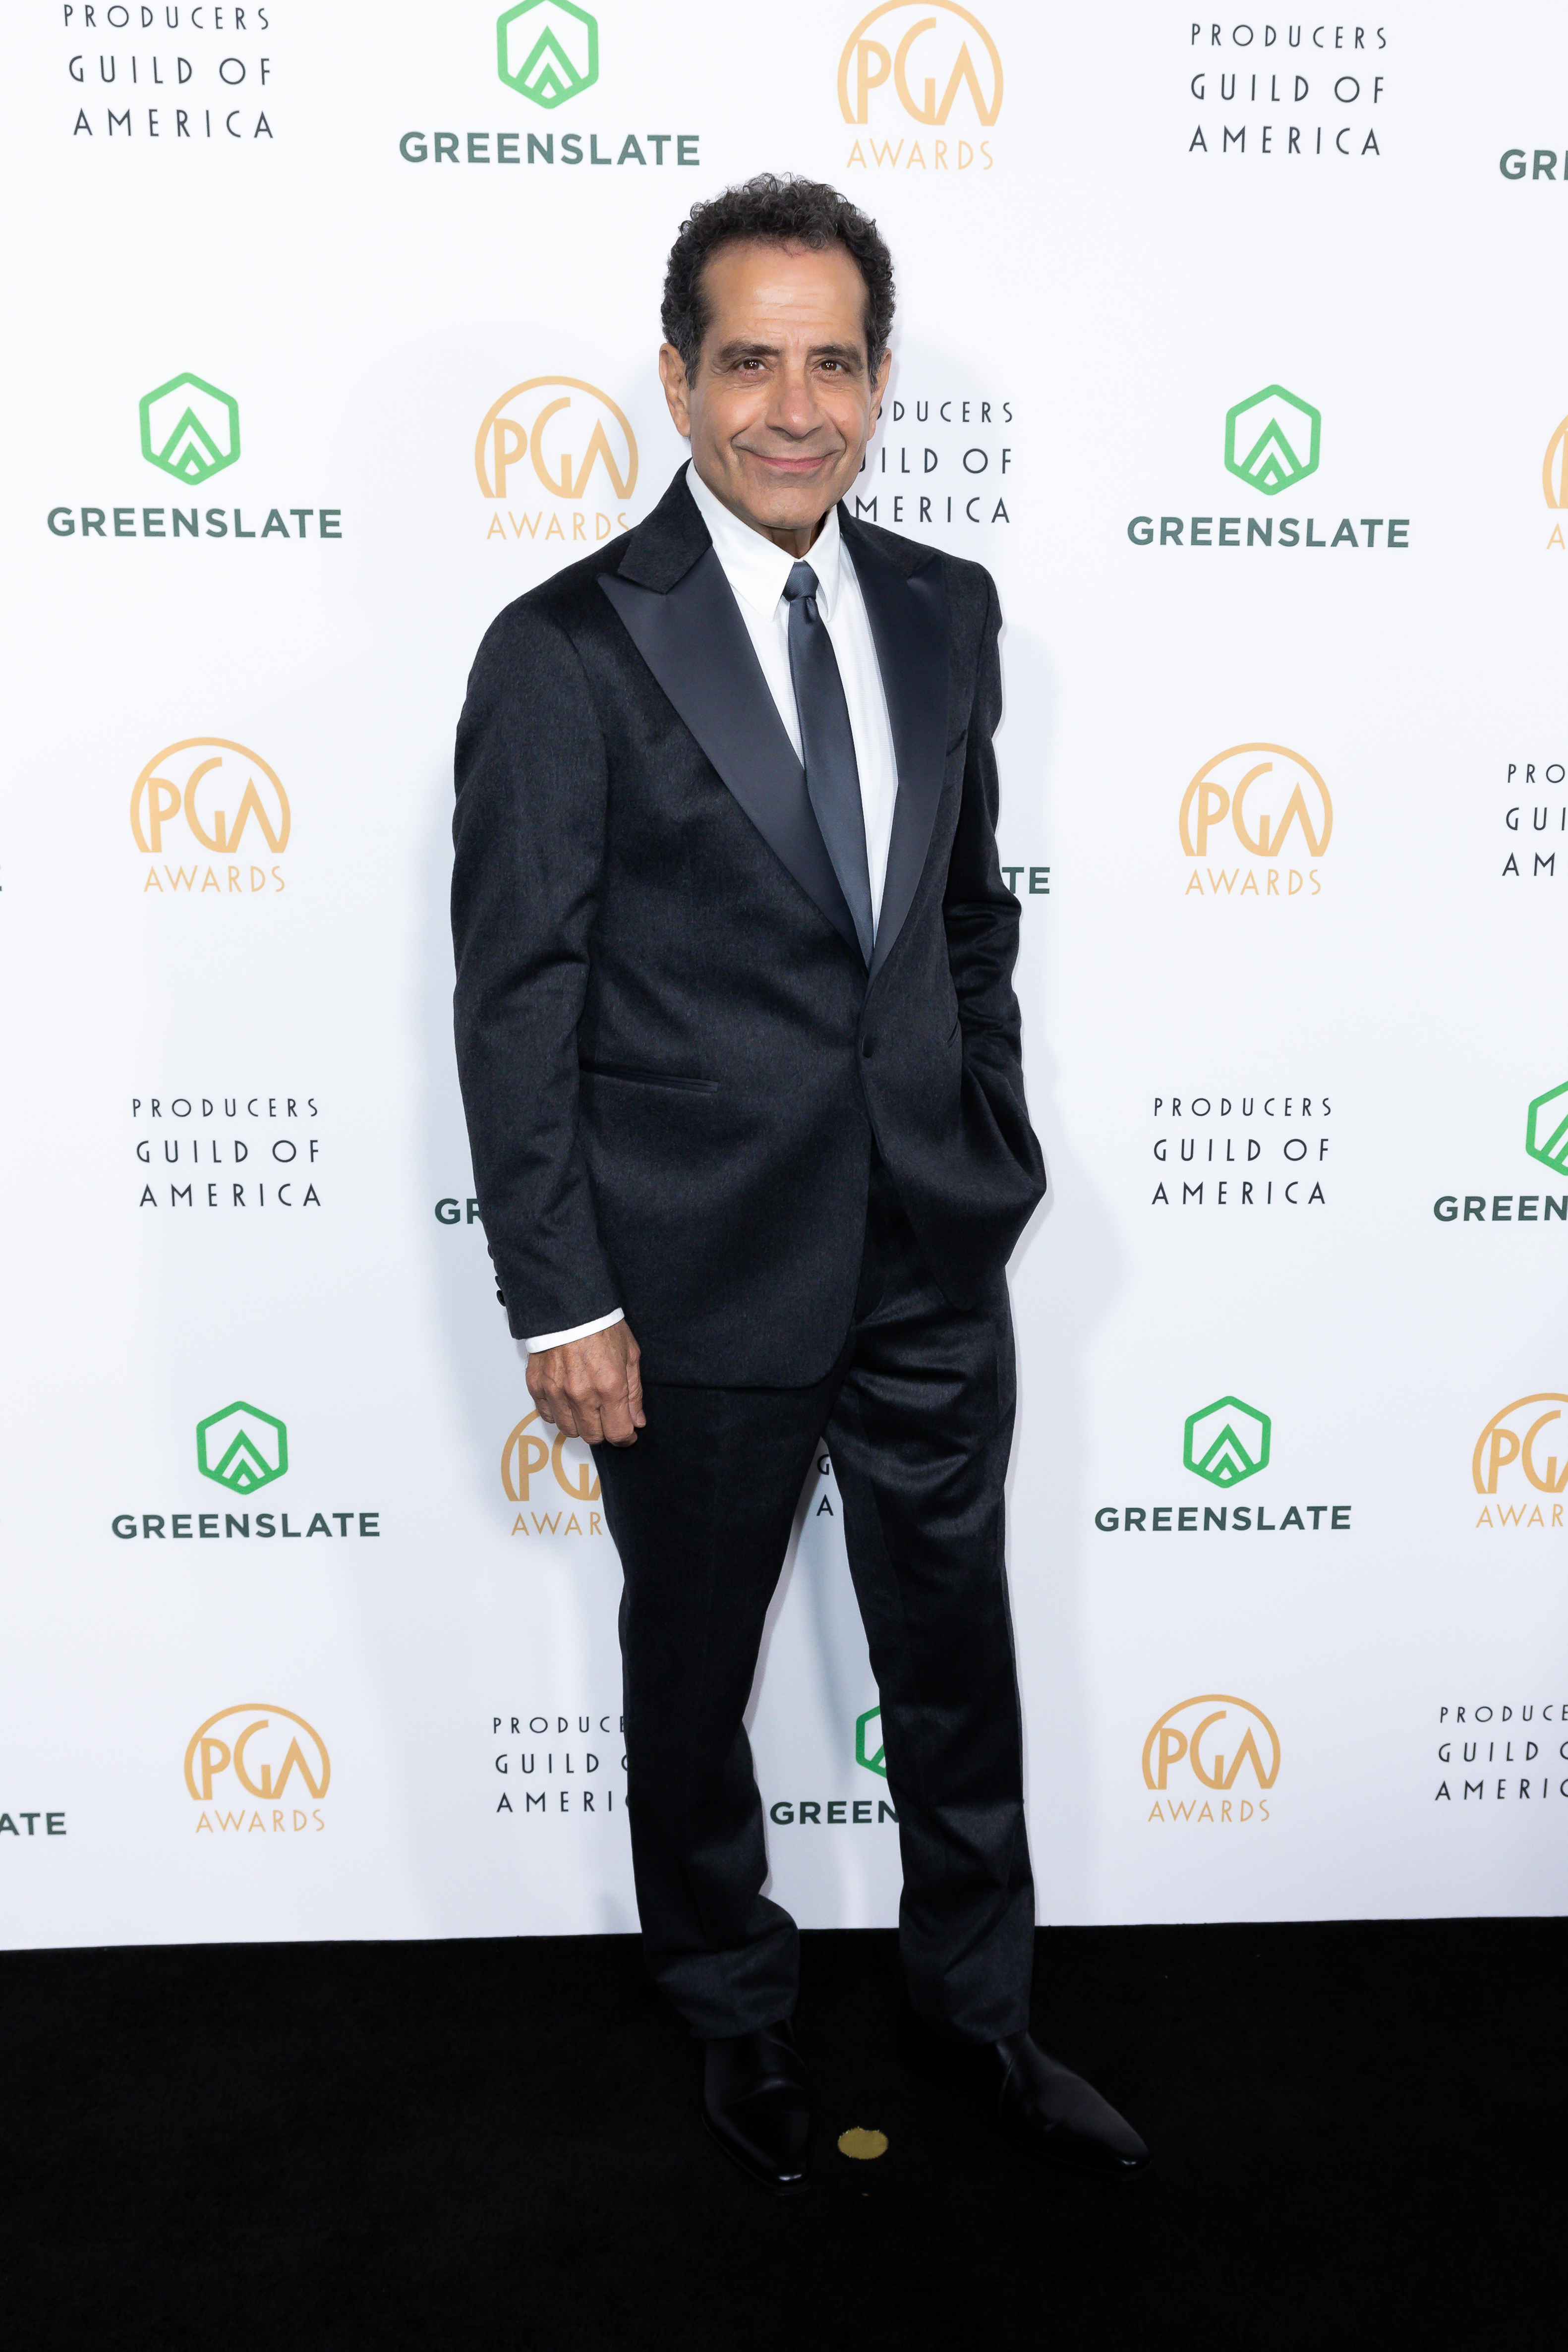 Tony Shalhoub in a suit poses at the Producers Guild Awards